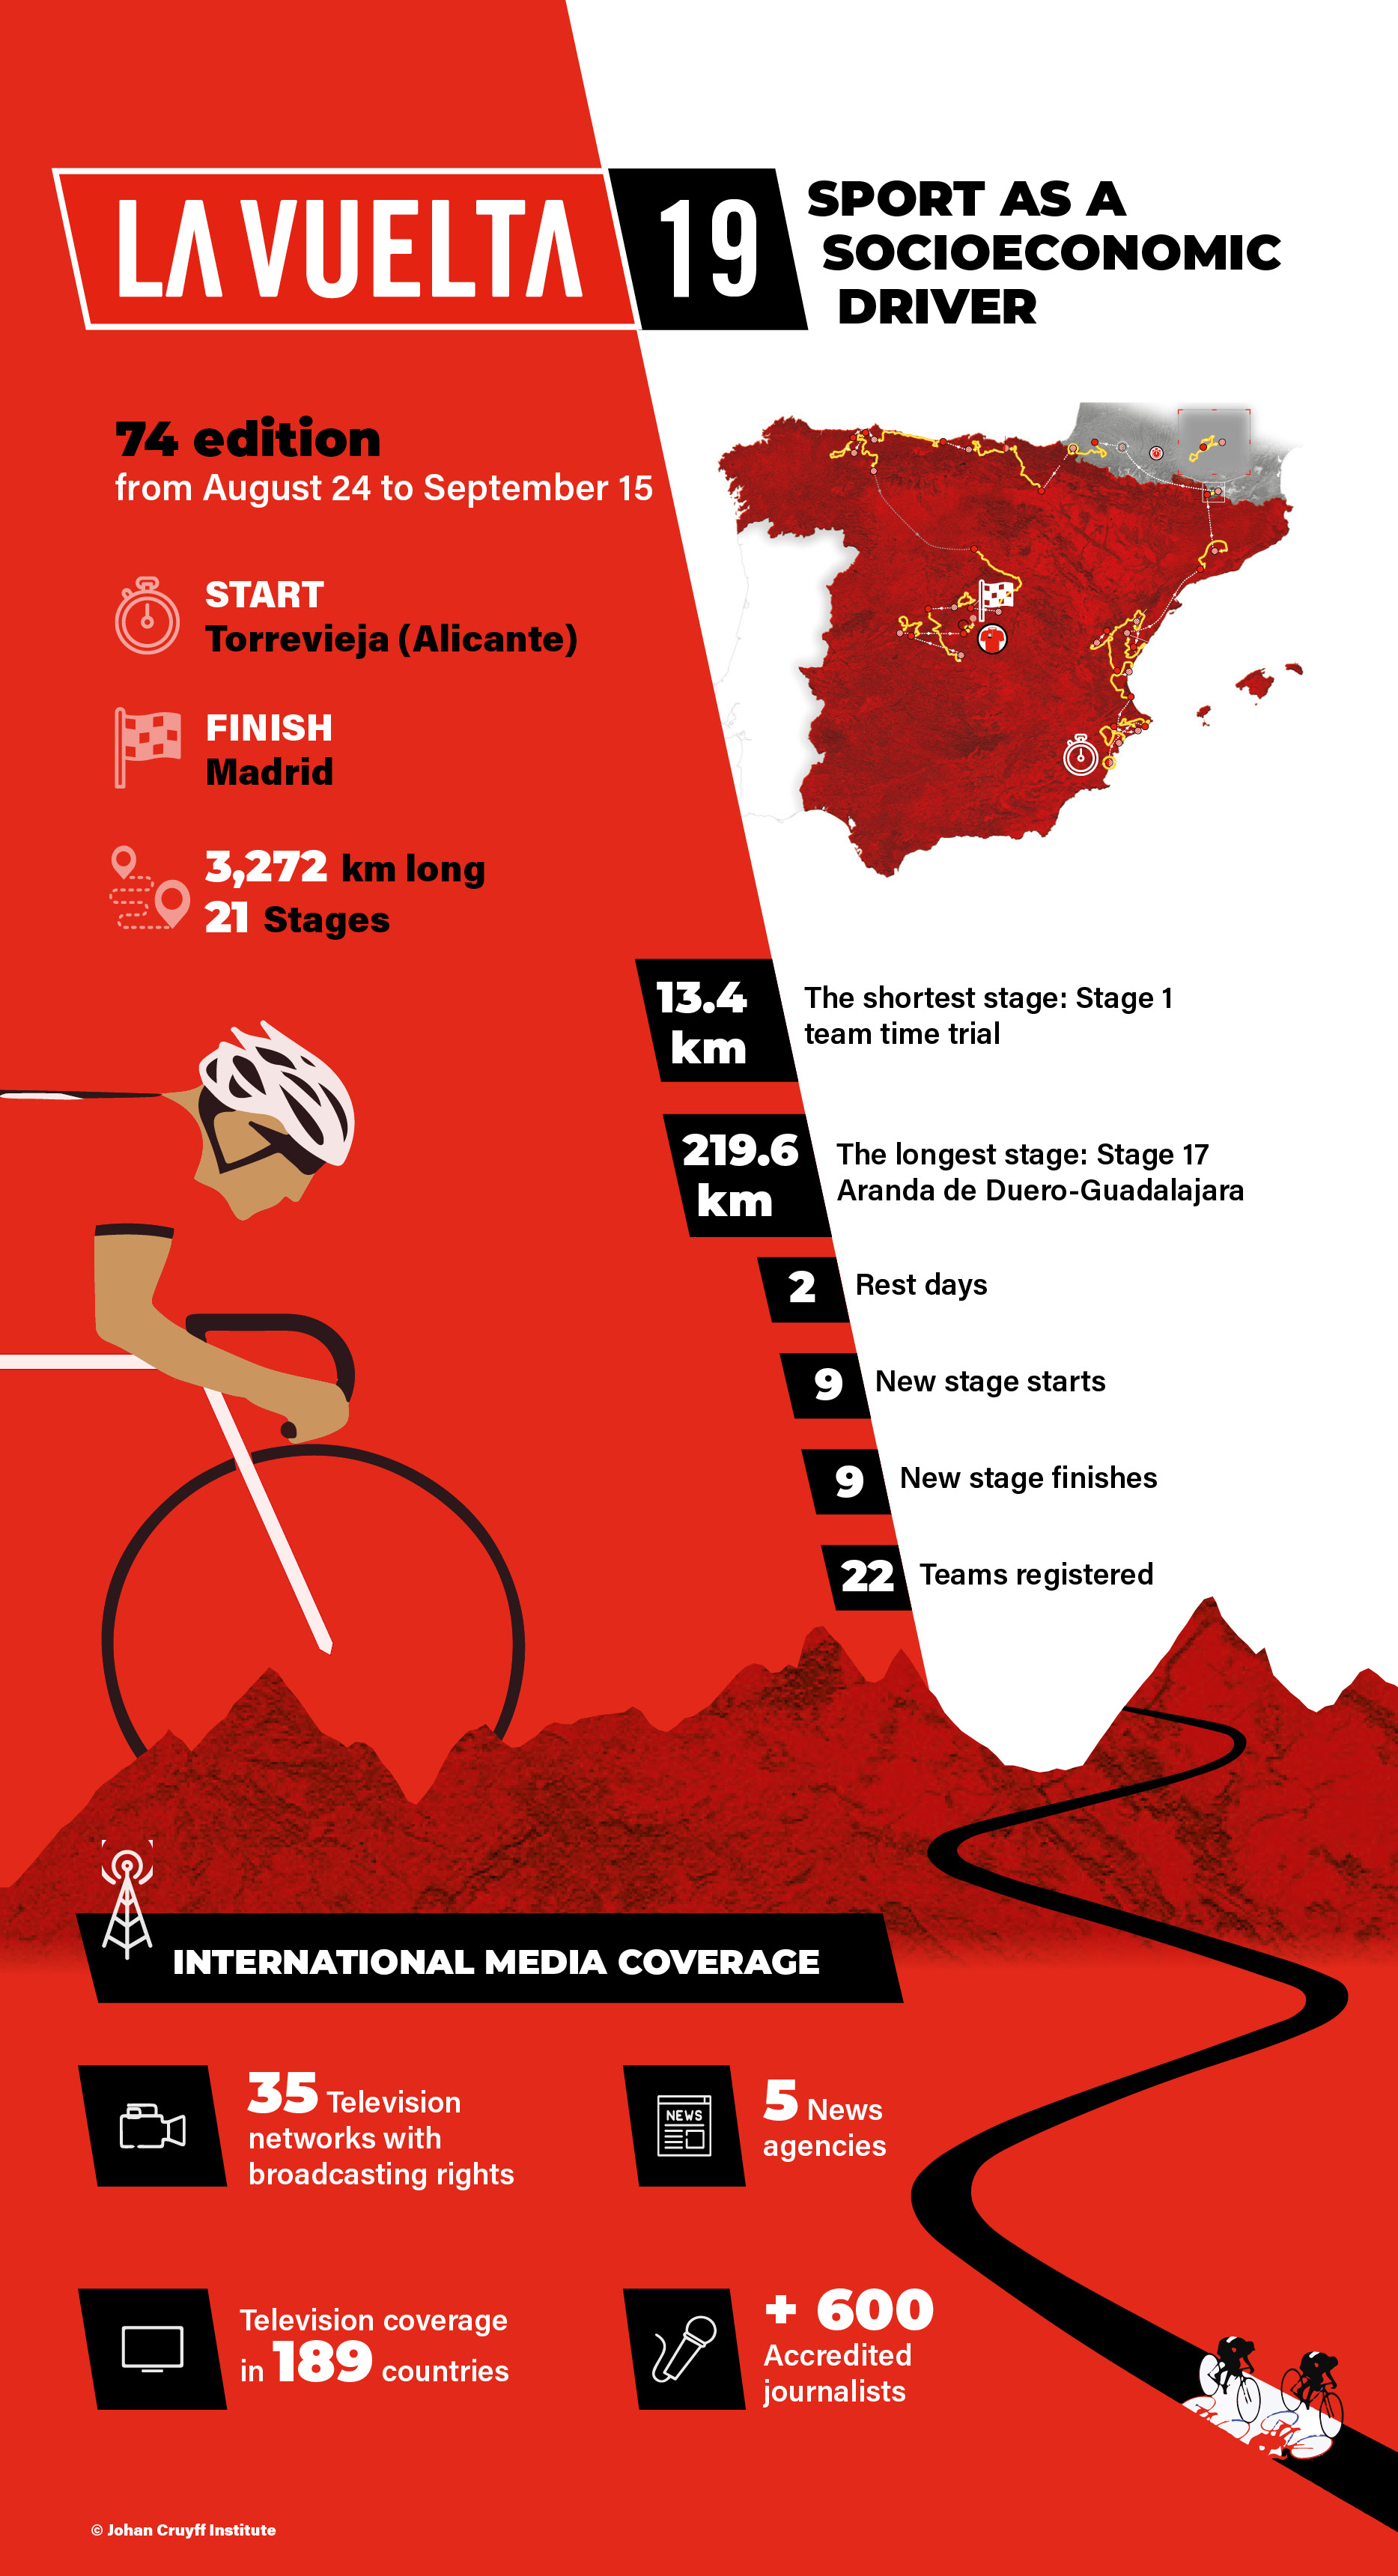 La Vuelta: a sporting event that sells Brand Spain like nobody else